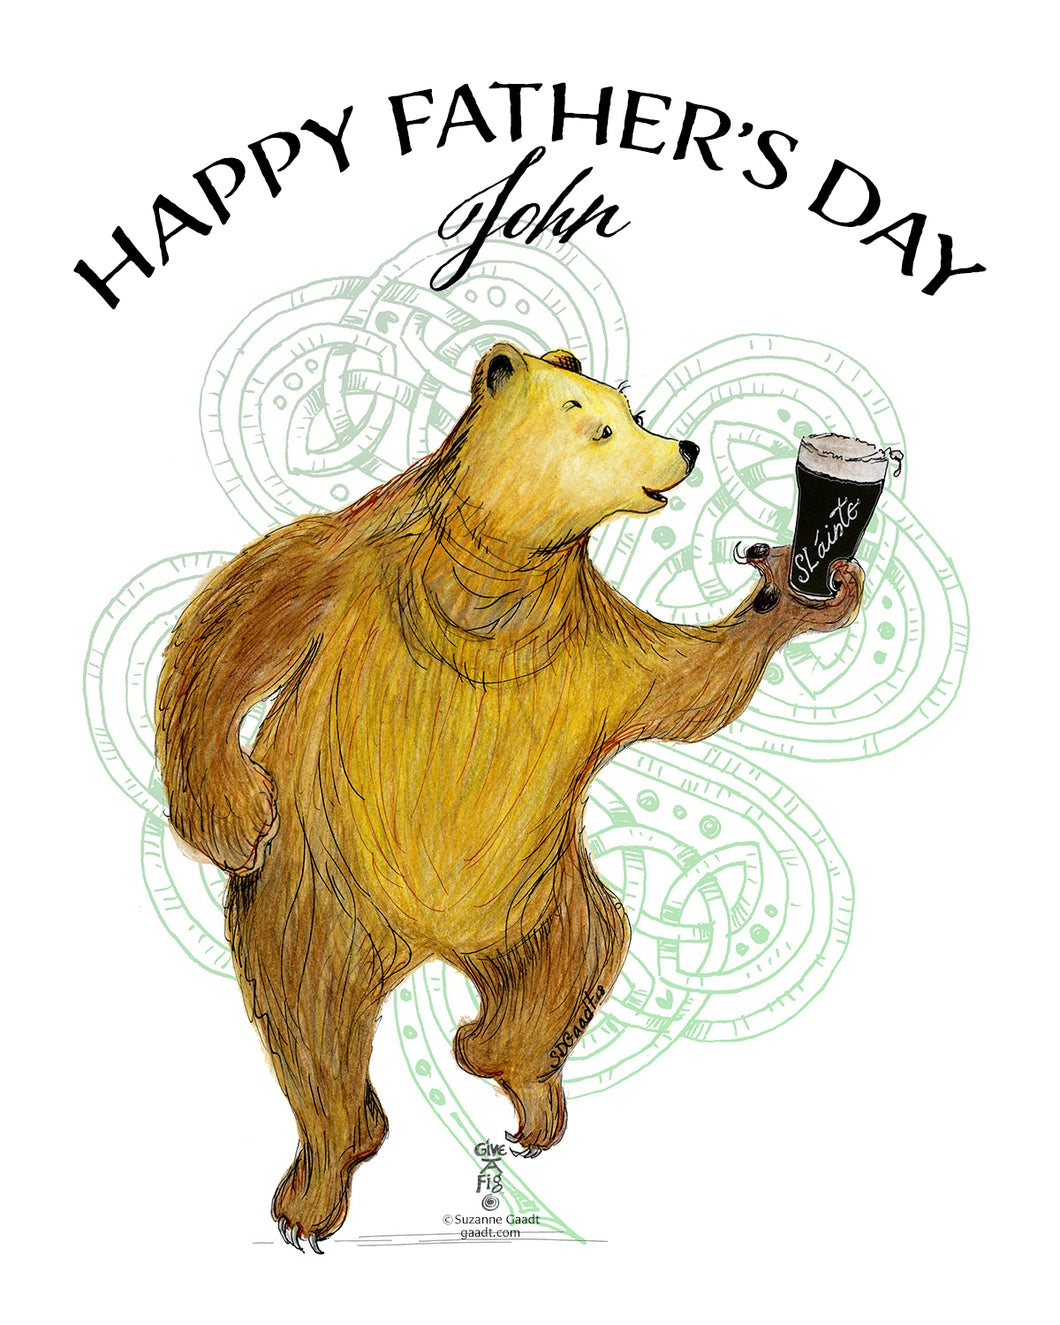 Father's Day with Traveling Bear Cards